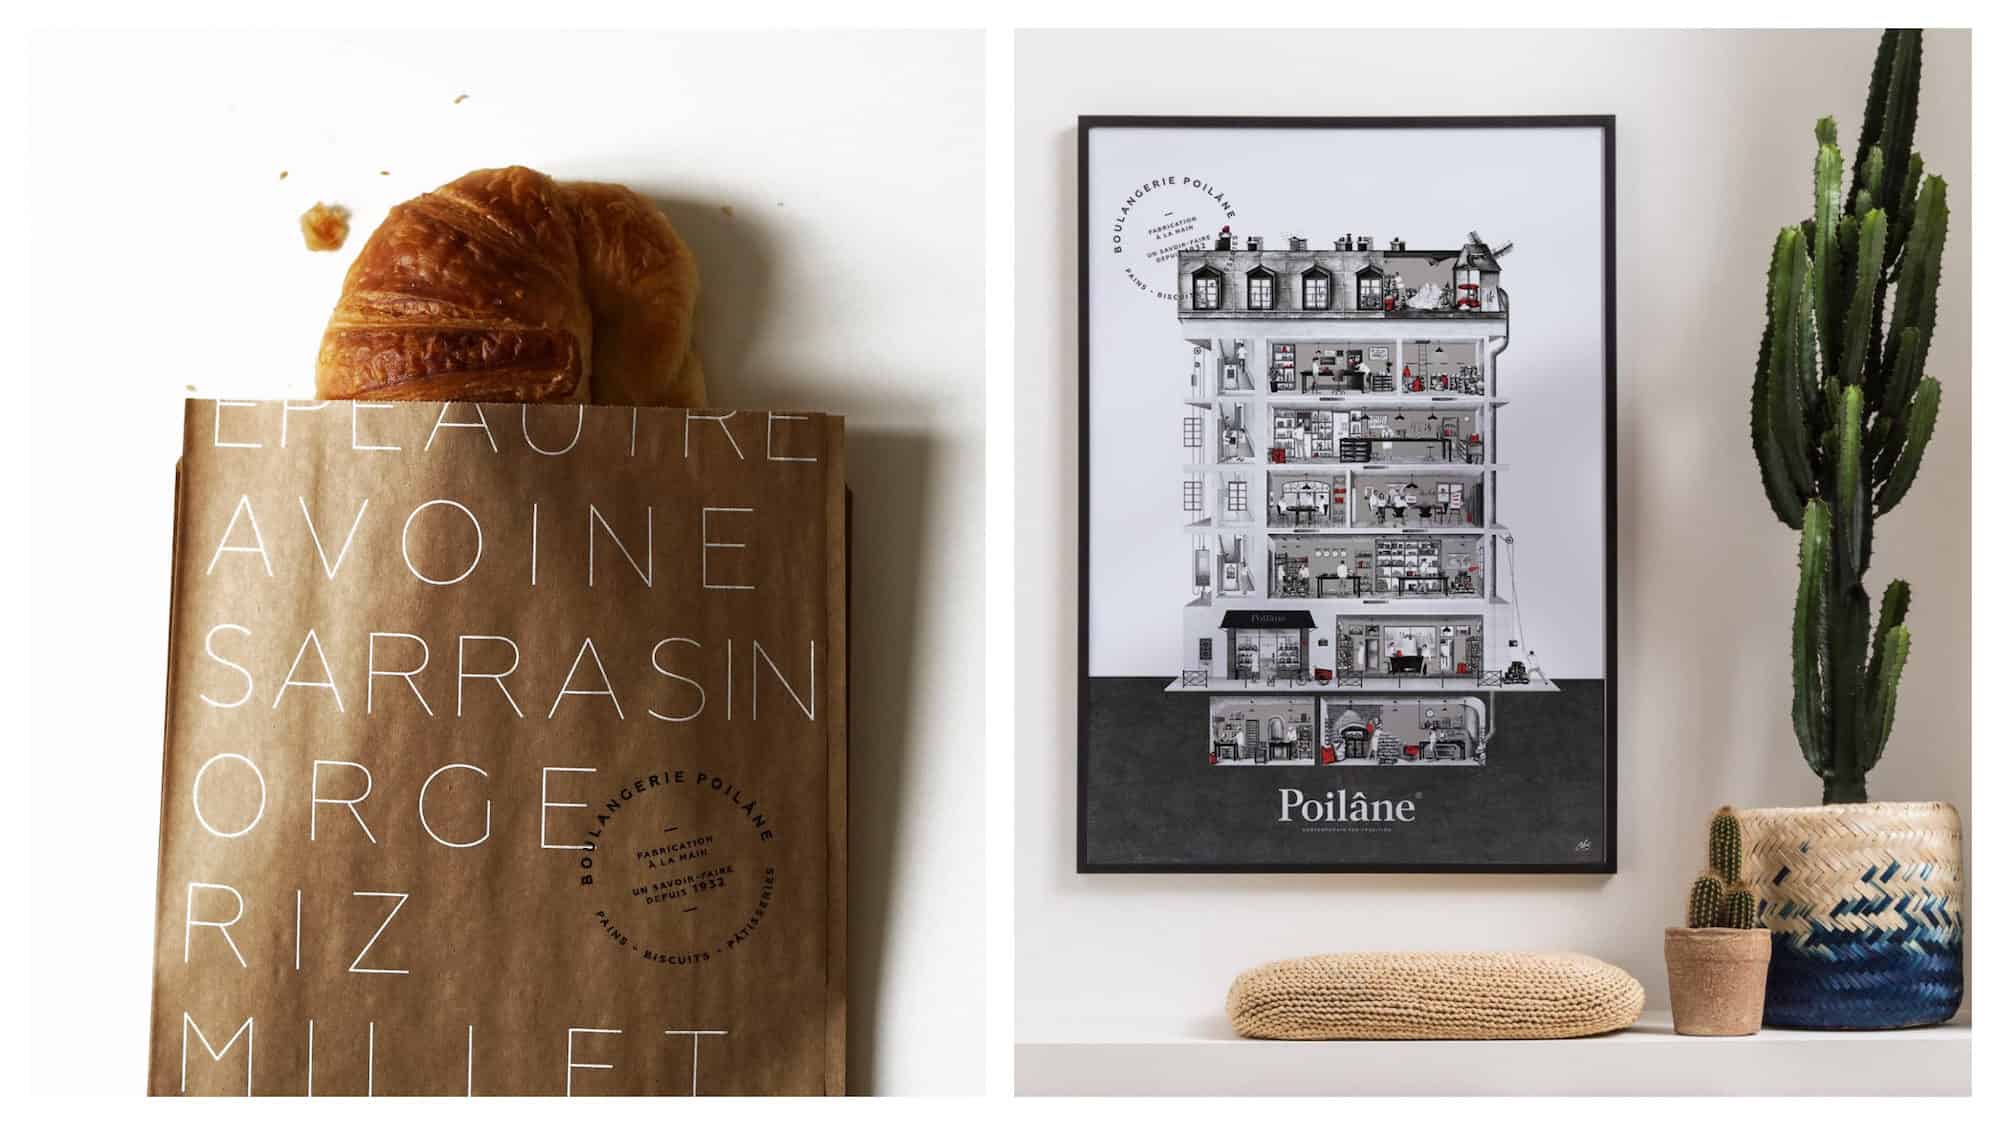 A buttery croissant from Poilane bakery on rue du Cherche-Midi in Paris (left). Artwork on the wall at Poilane bakery on rue du Cherche-midi in Paris.